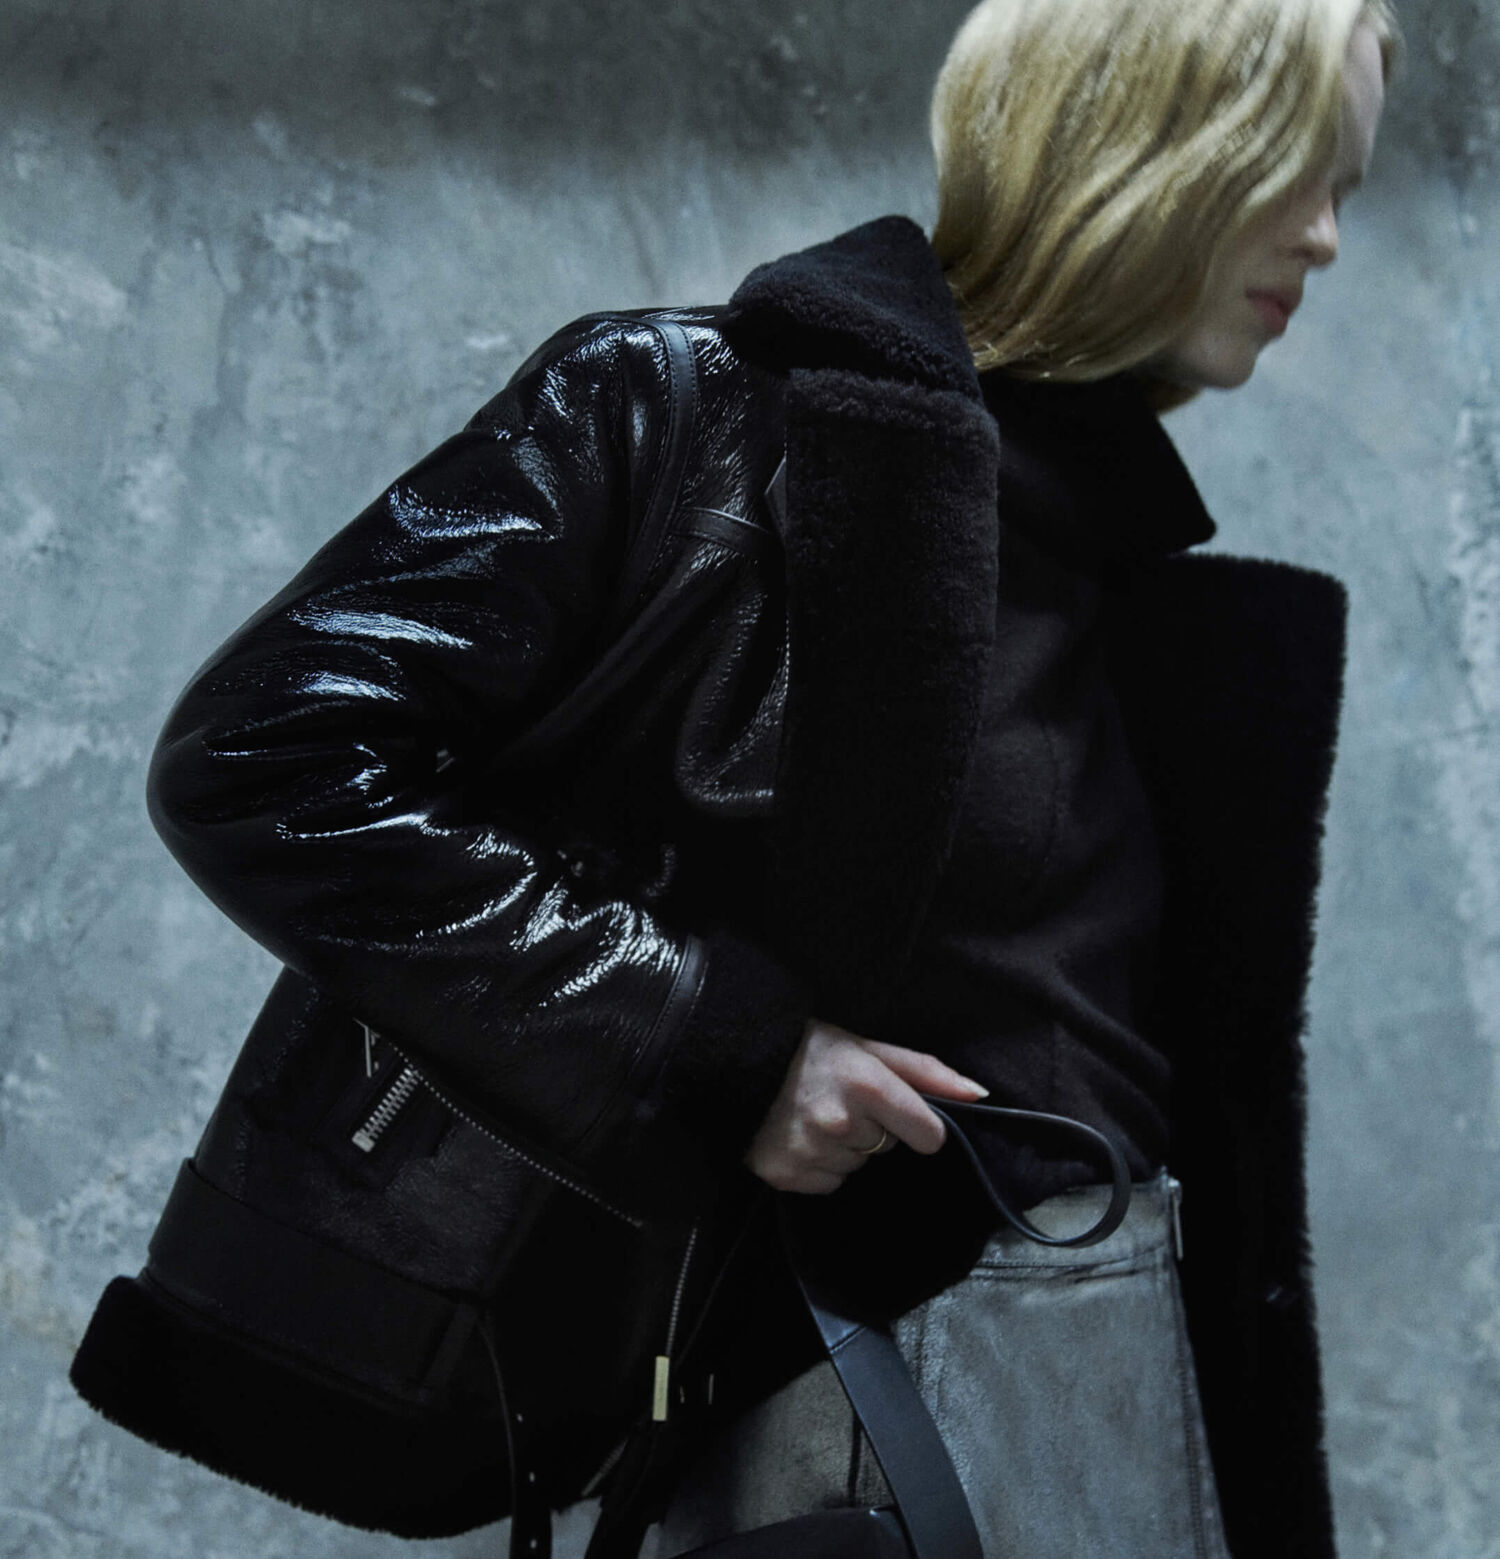 Woman wearing a leather shearling jacket and grey metallic skirt